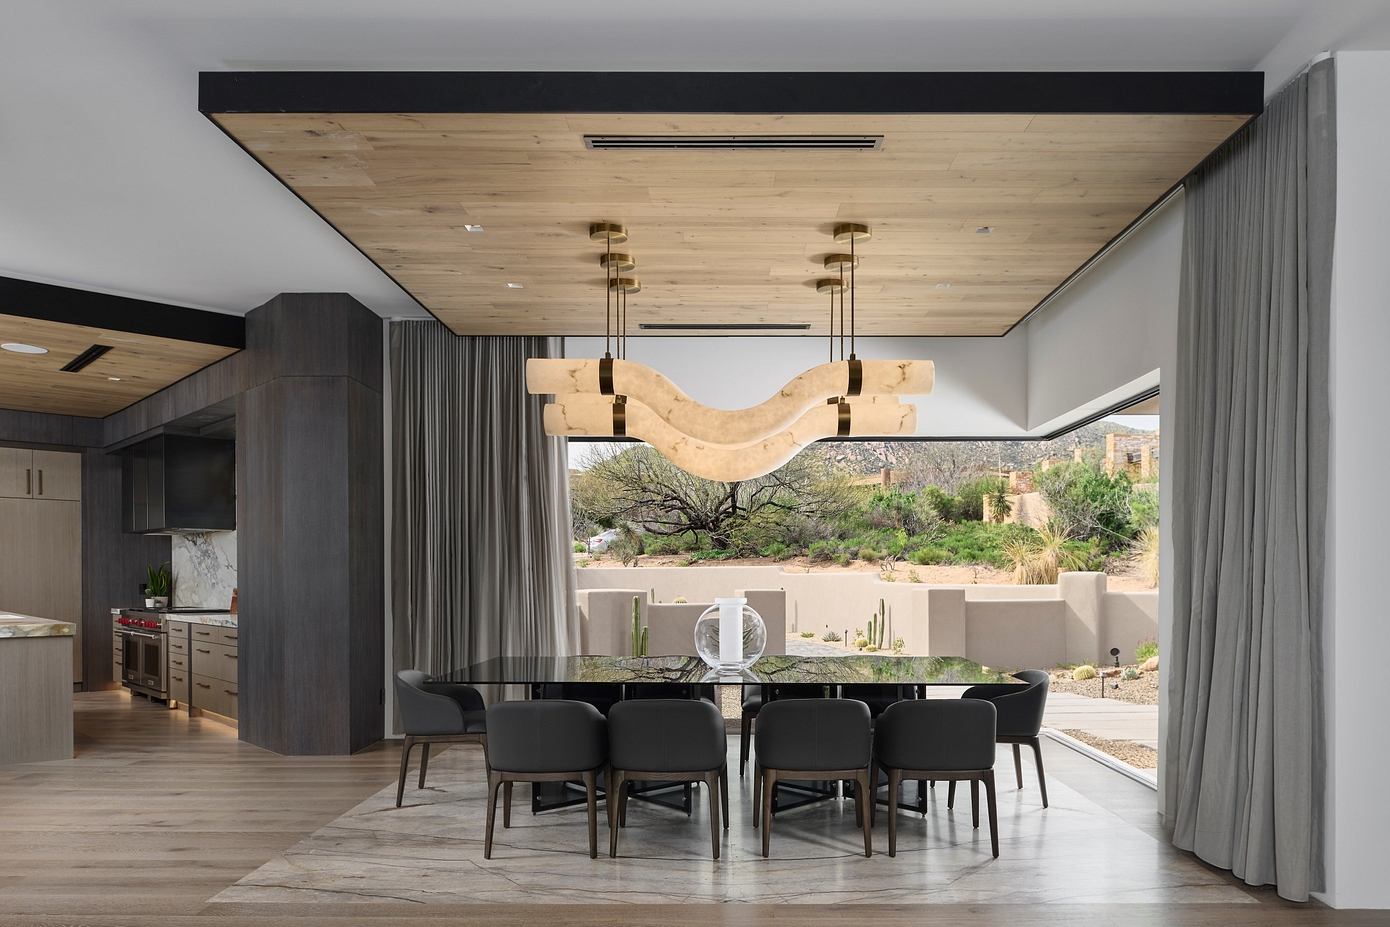 Solace Residence: Exquisite Arizona House Redefined by Antolini